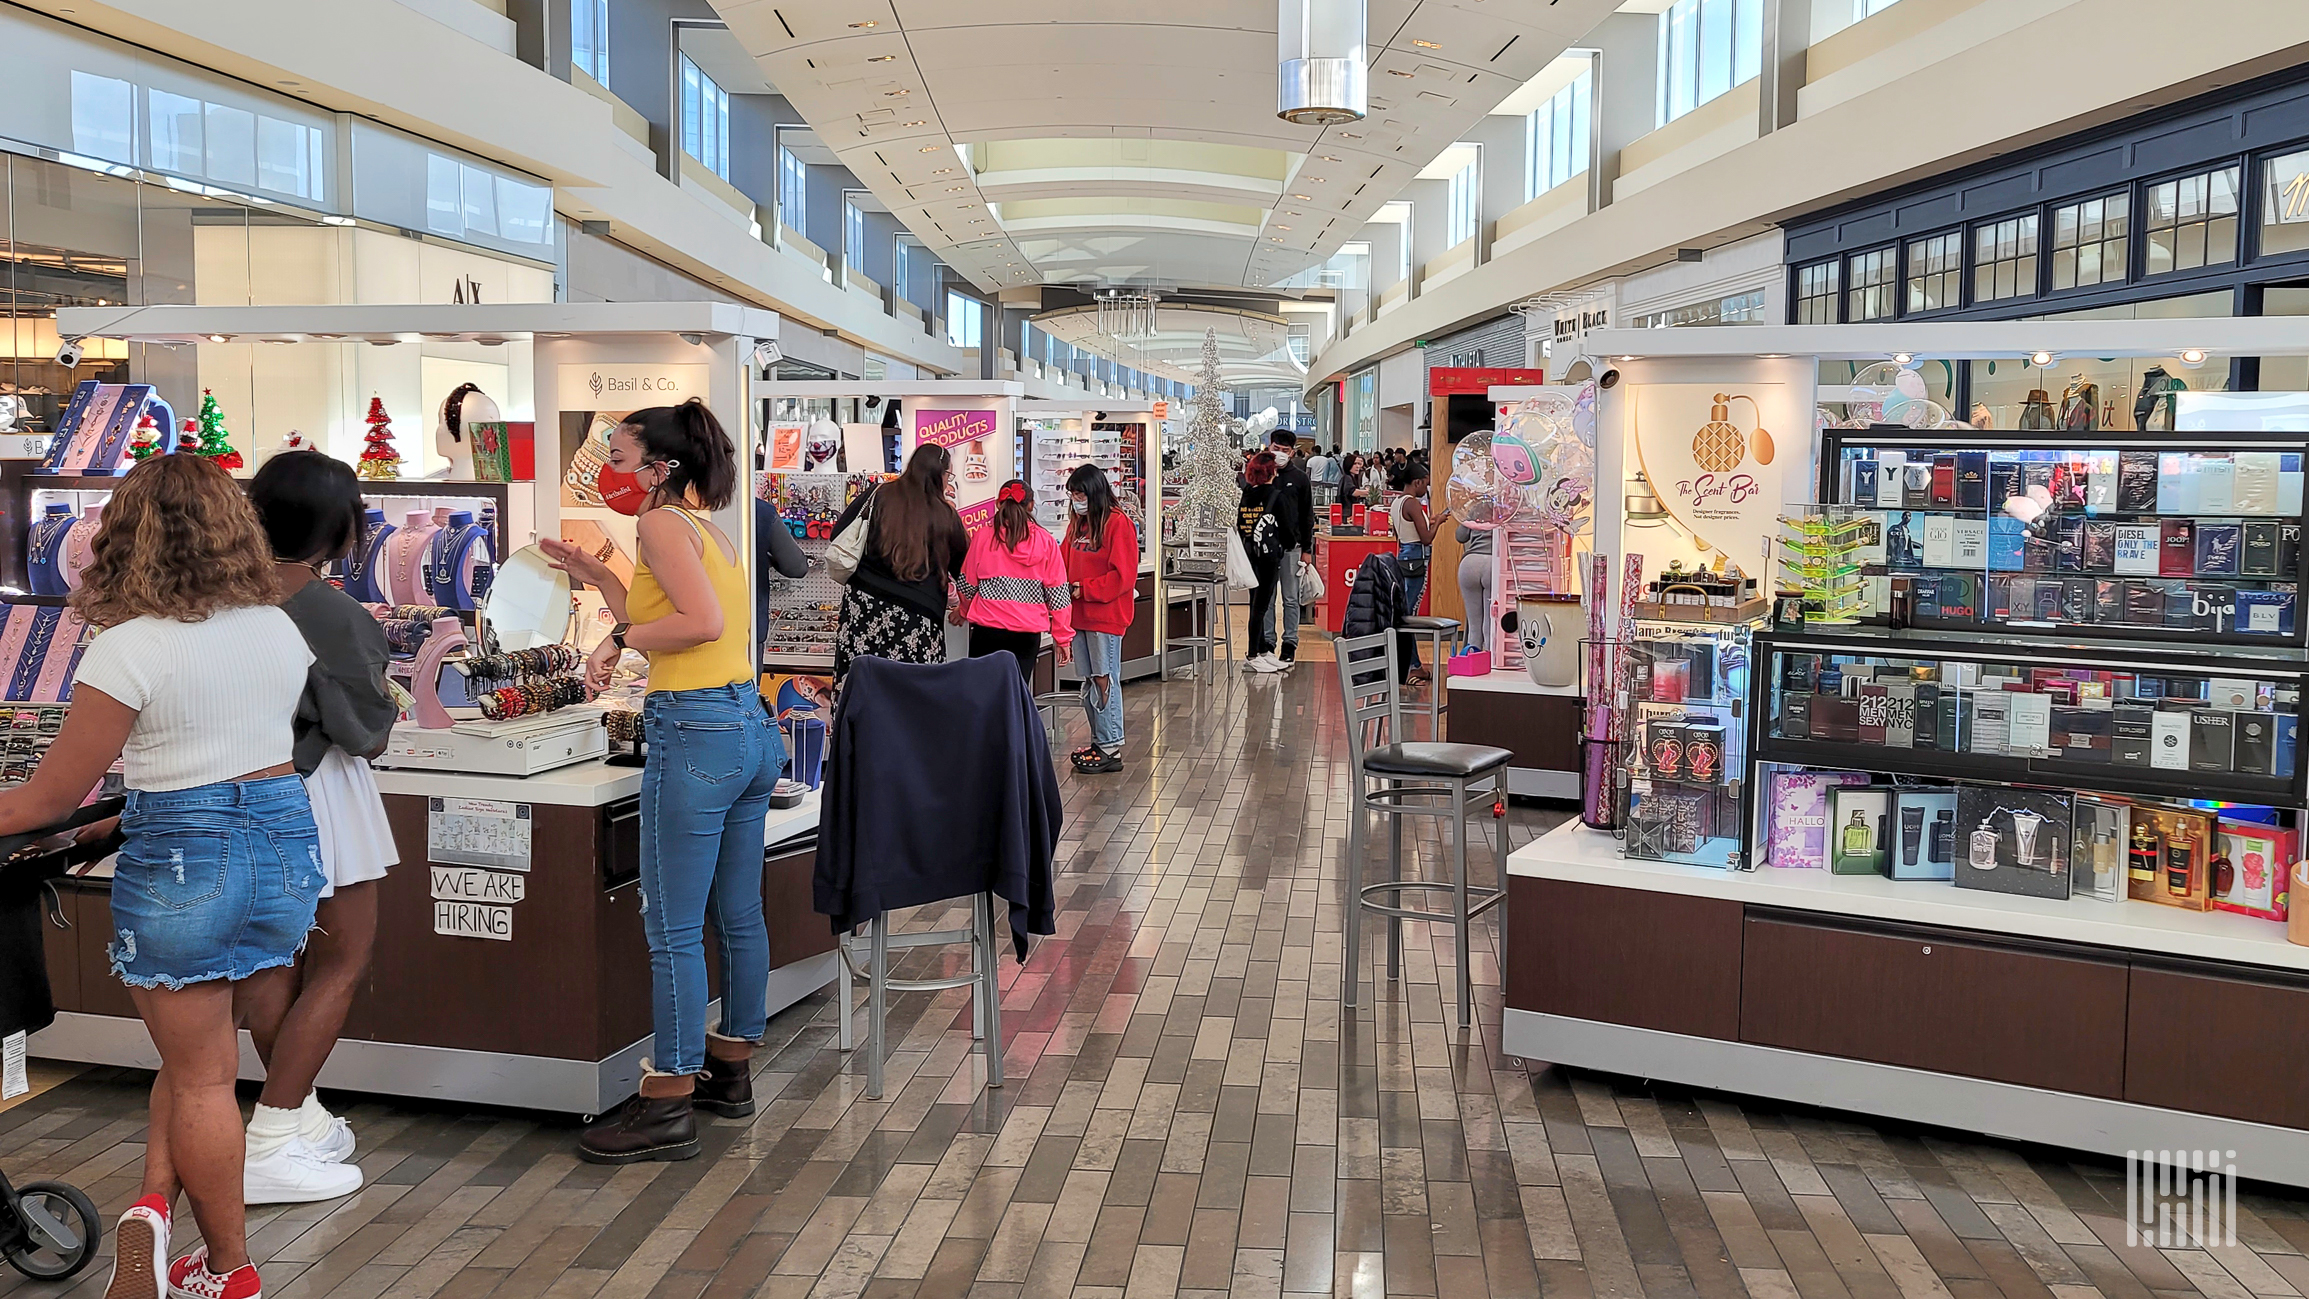 Customers shopping inside a mall